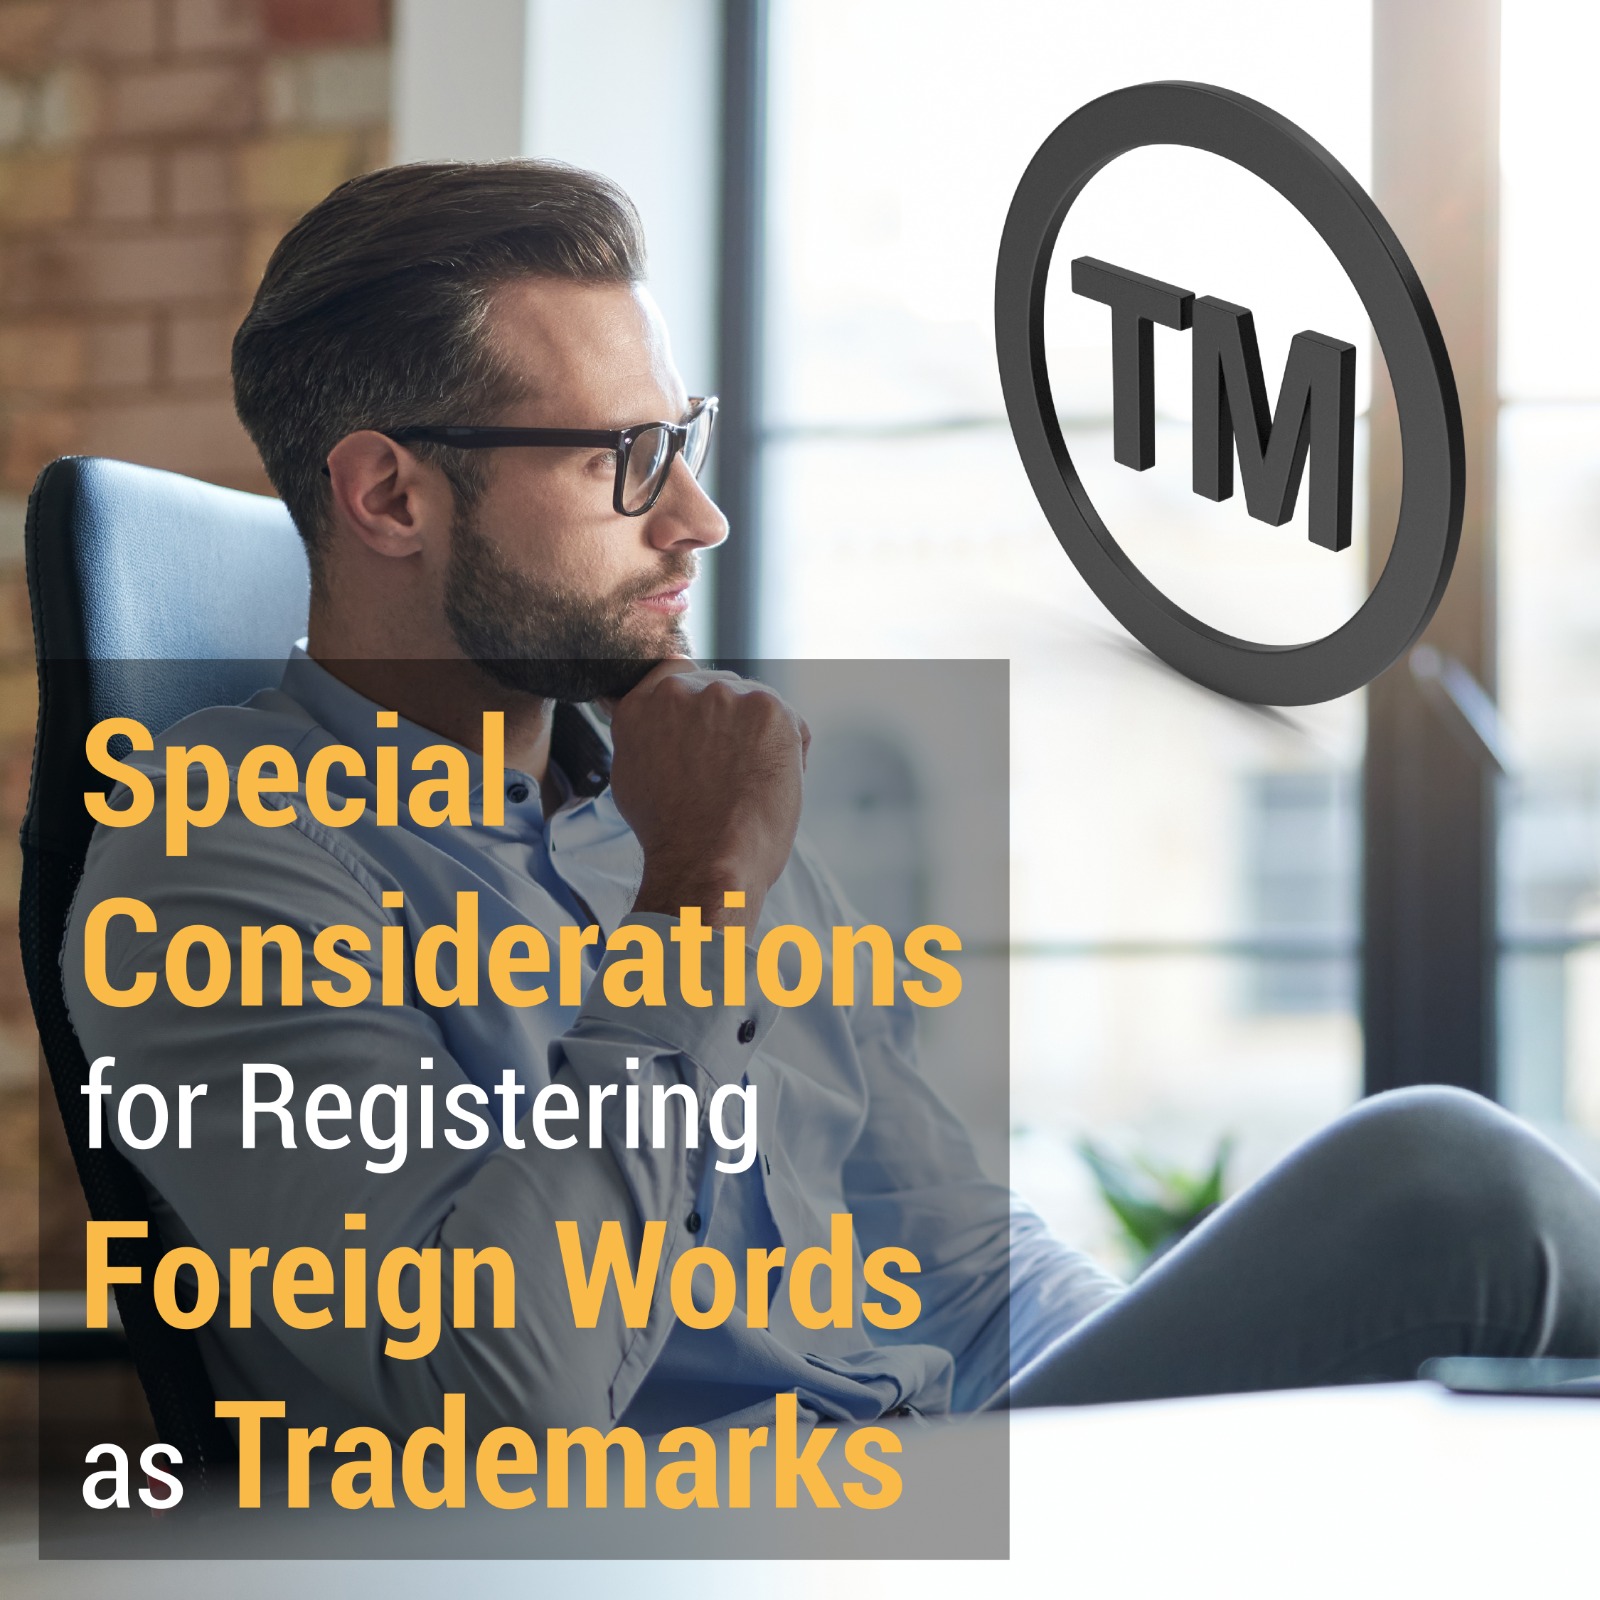 Special Considerations for Registering Foreign Words as Trademarks